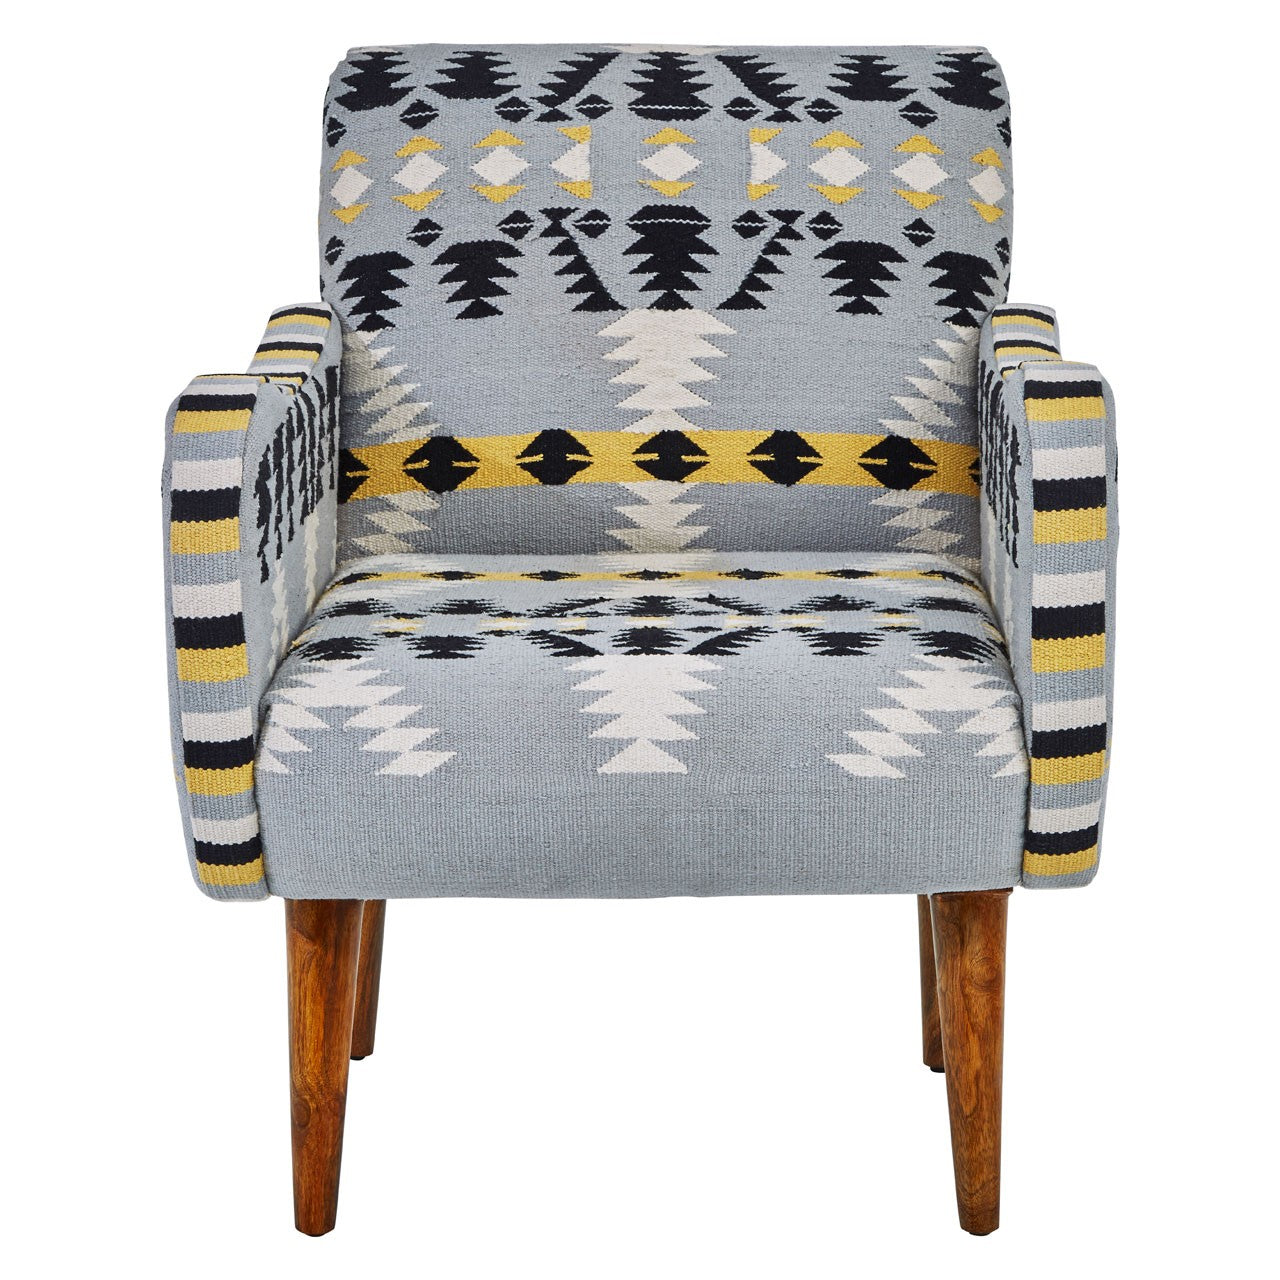 Boho Inspired Navajo Meets Scandi Style Arm Chair featuring Geometric Patterns